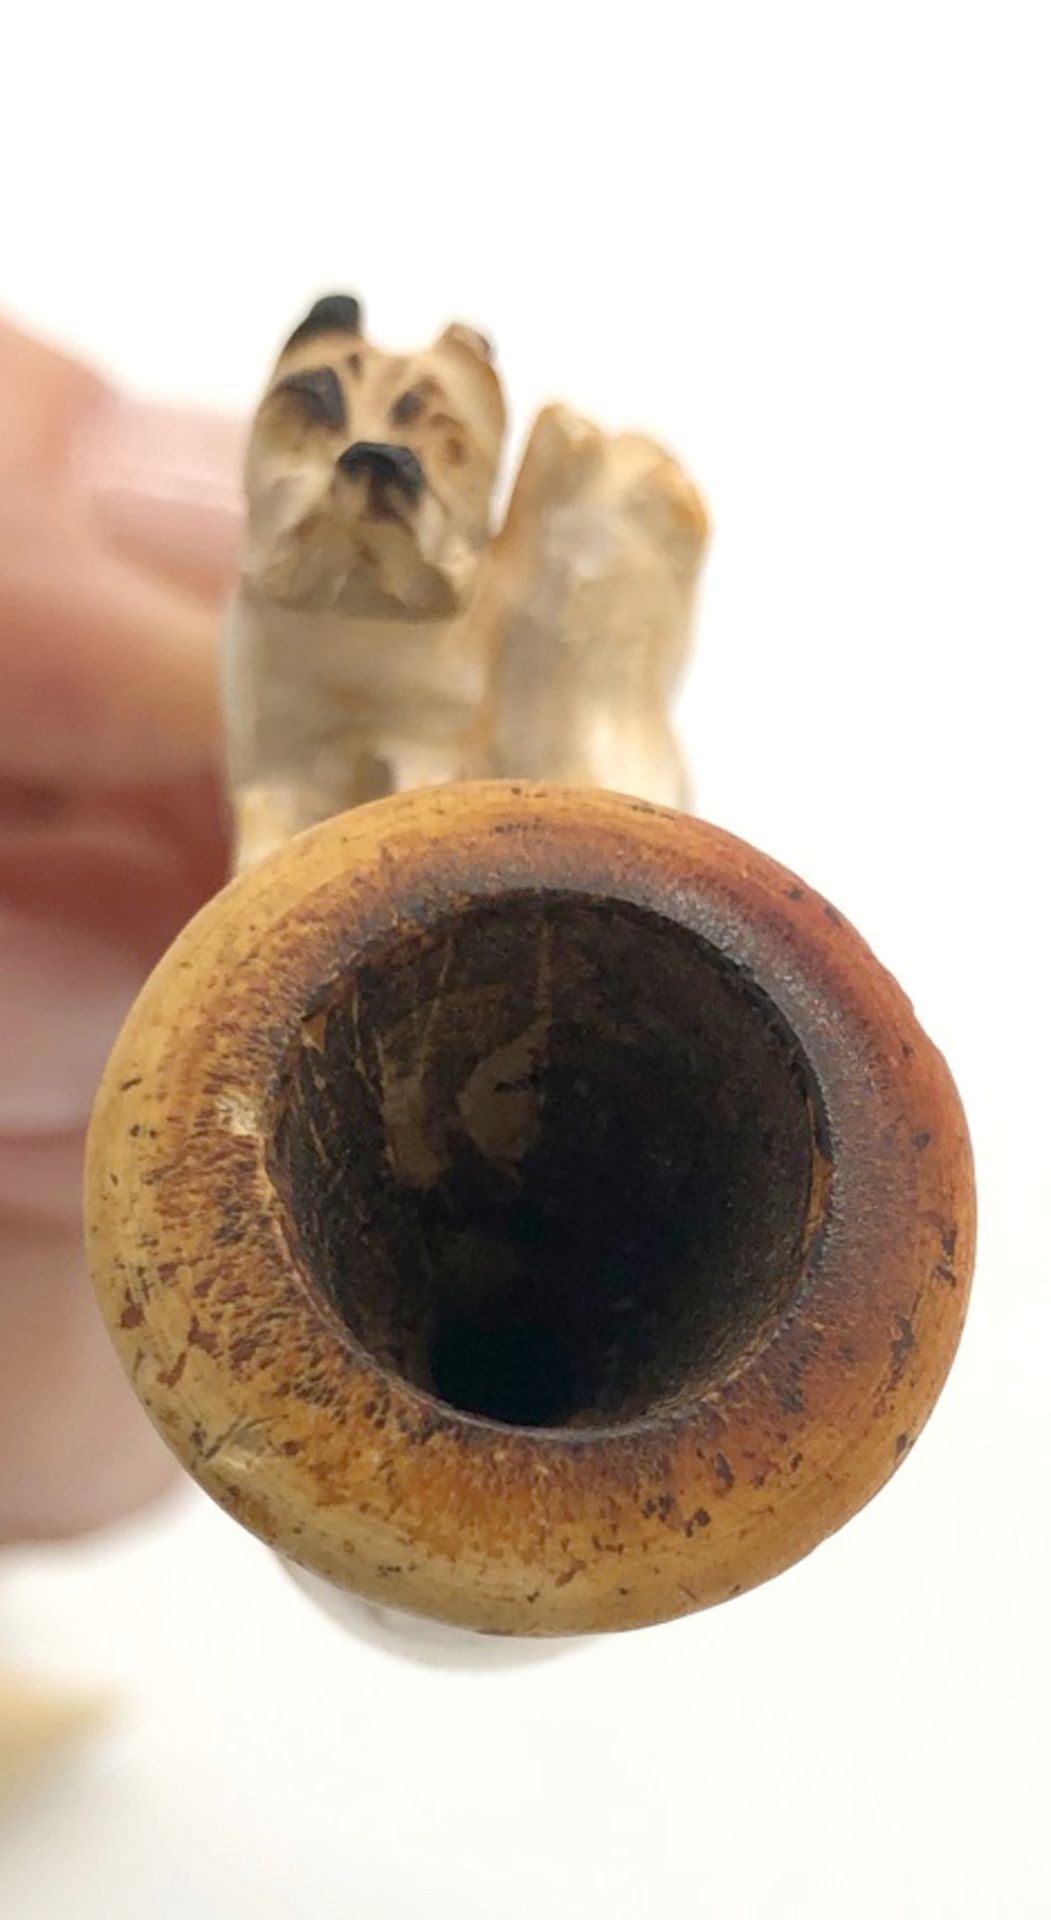 3 meerschaum pipes with pug. One with a case. Probably 120 - 180 years old - Bild 17 aus 18